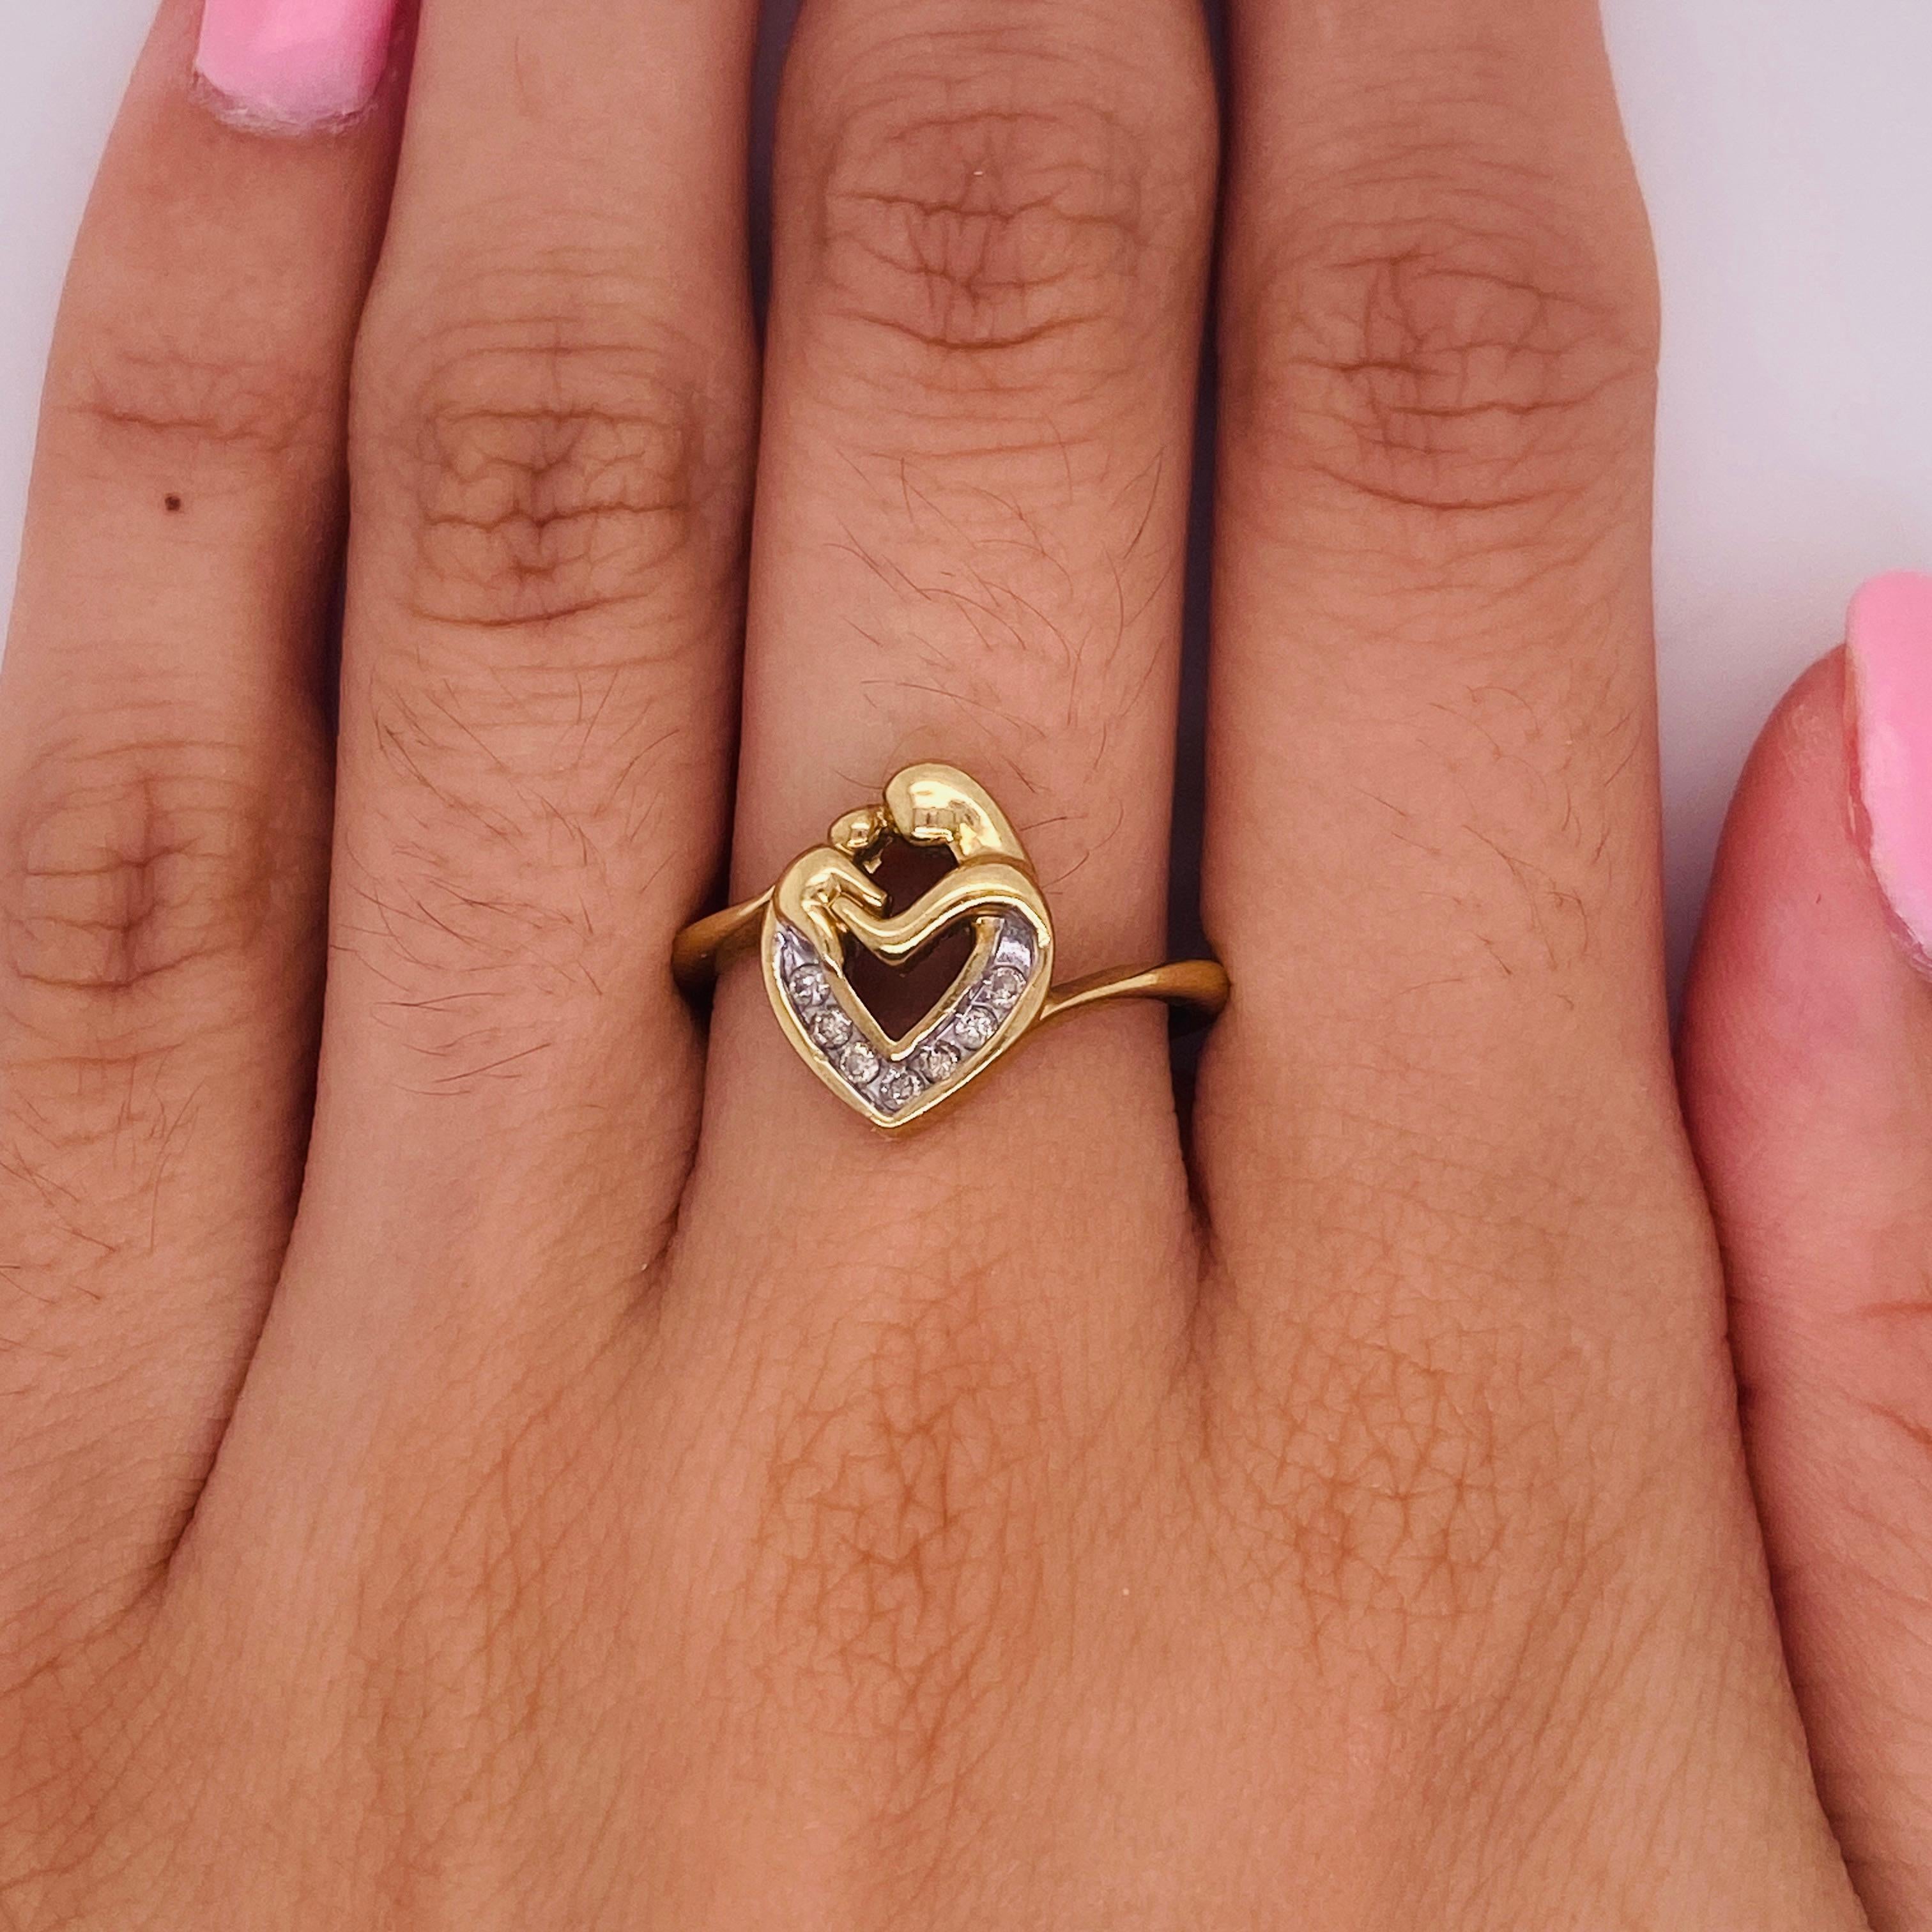 Celebrate the love of a mother and child with this sweet heart design ring. The band of the ring sweeps toward the top and bottom of the heart in a slender bypass style that makes the center design the primary focus. Make this ring the perfect gift